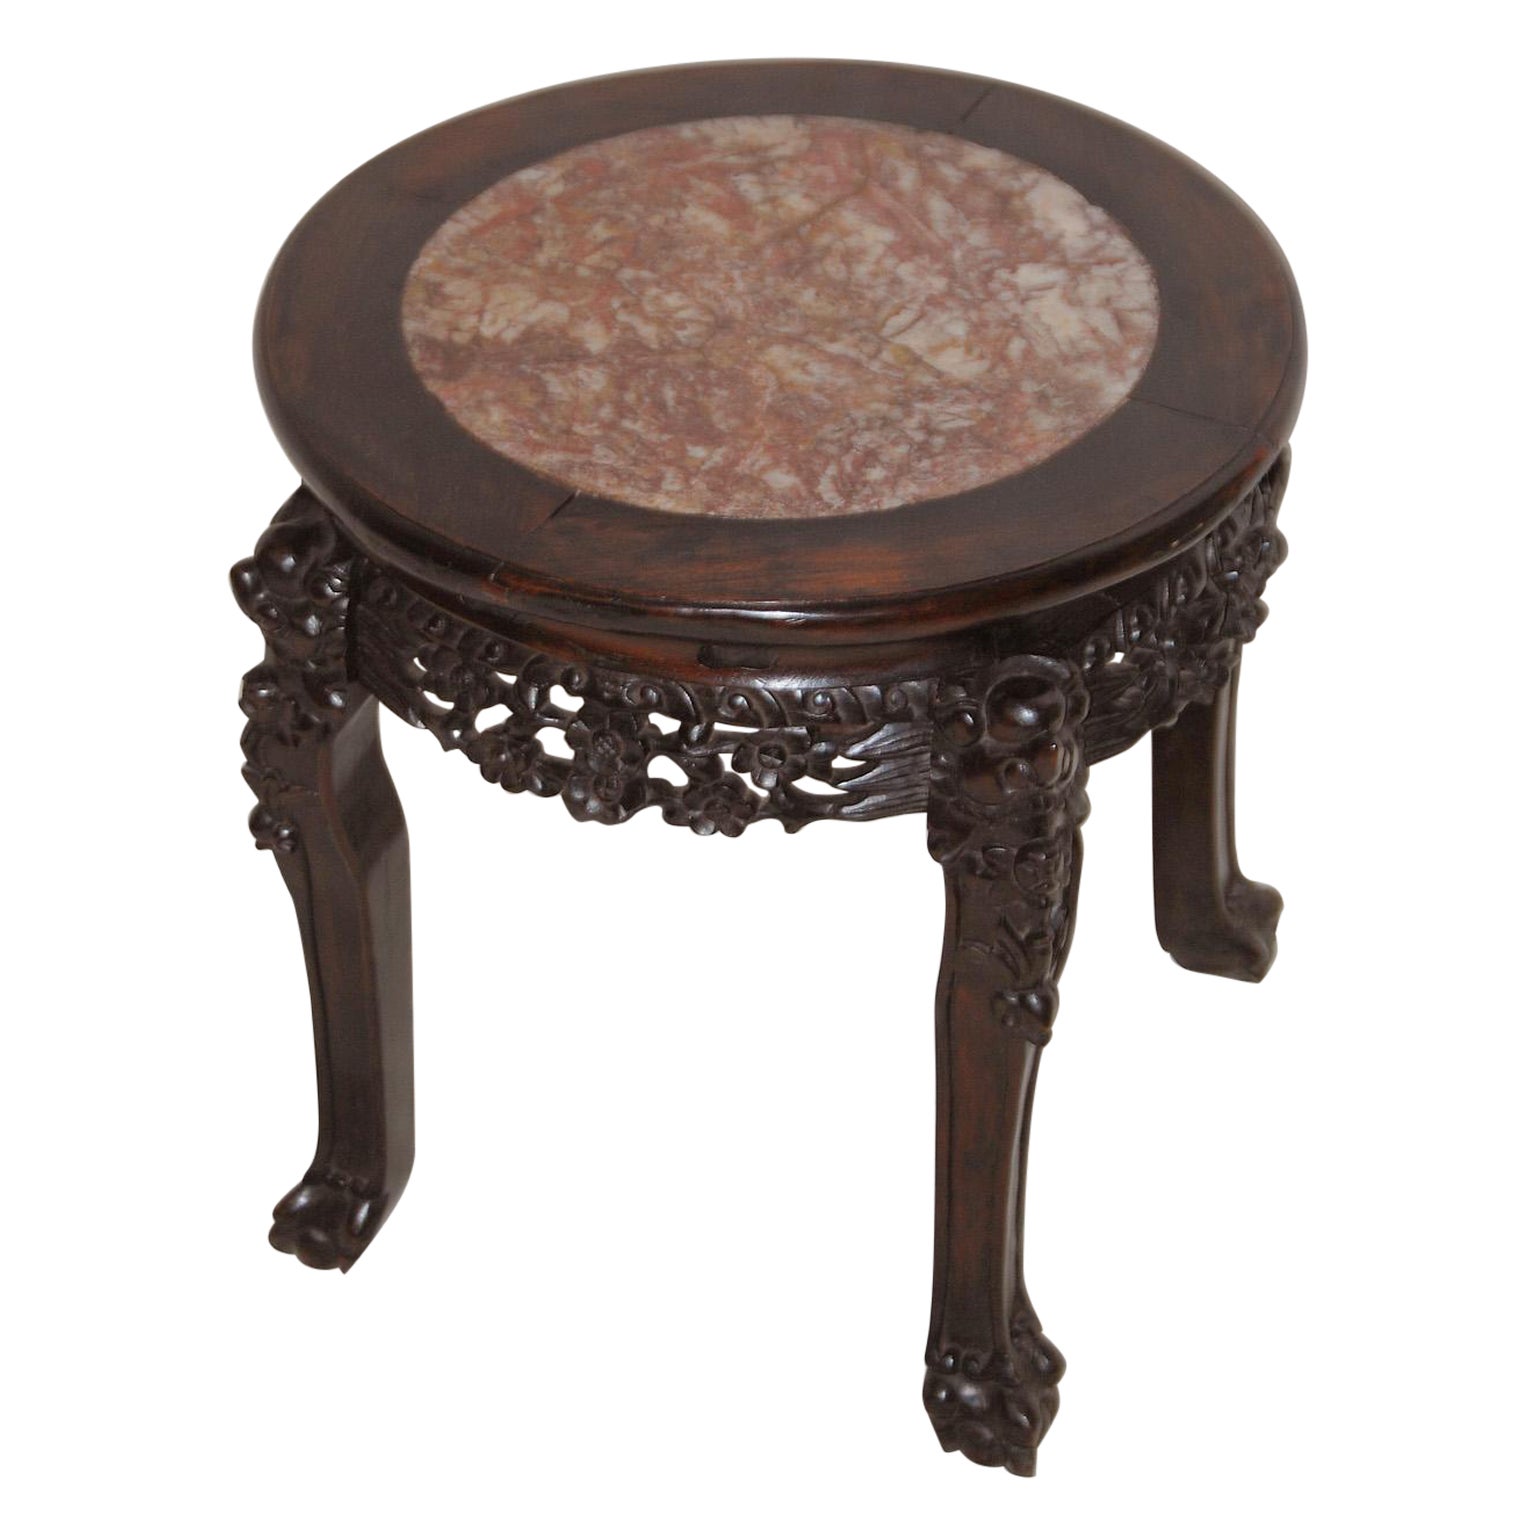 Chinese Qing Dynasty Rosewood Carved Stool with Rose Marble Inlaid Seat